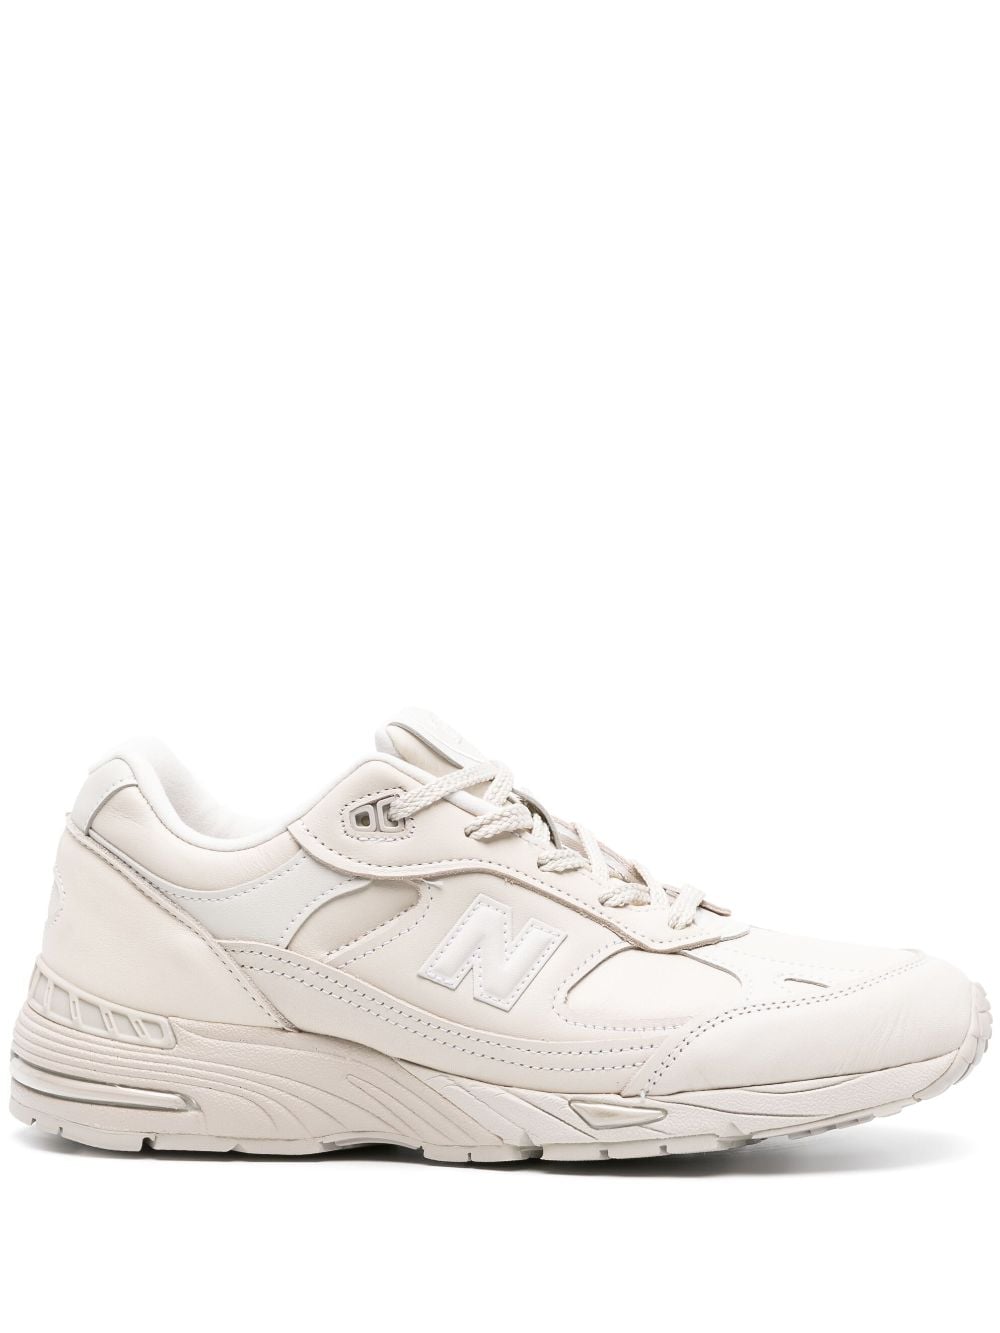 New Balance Made in UK 991 sneakers - Grey